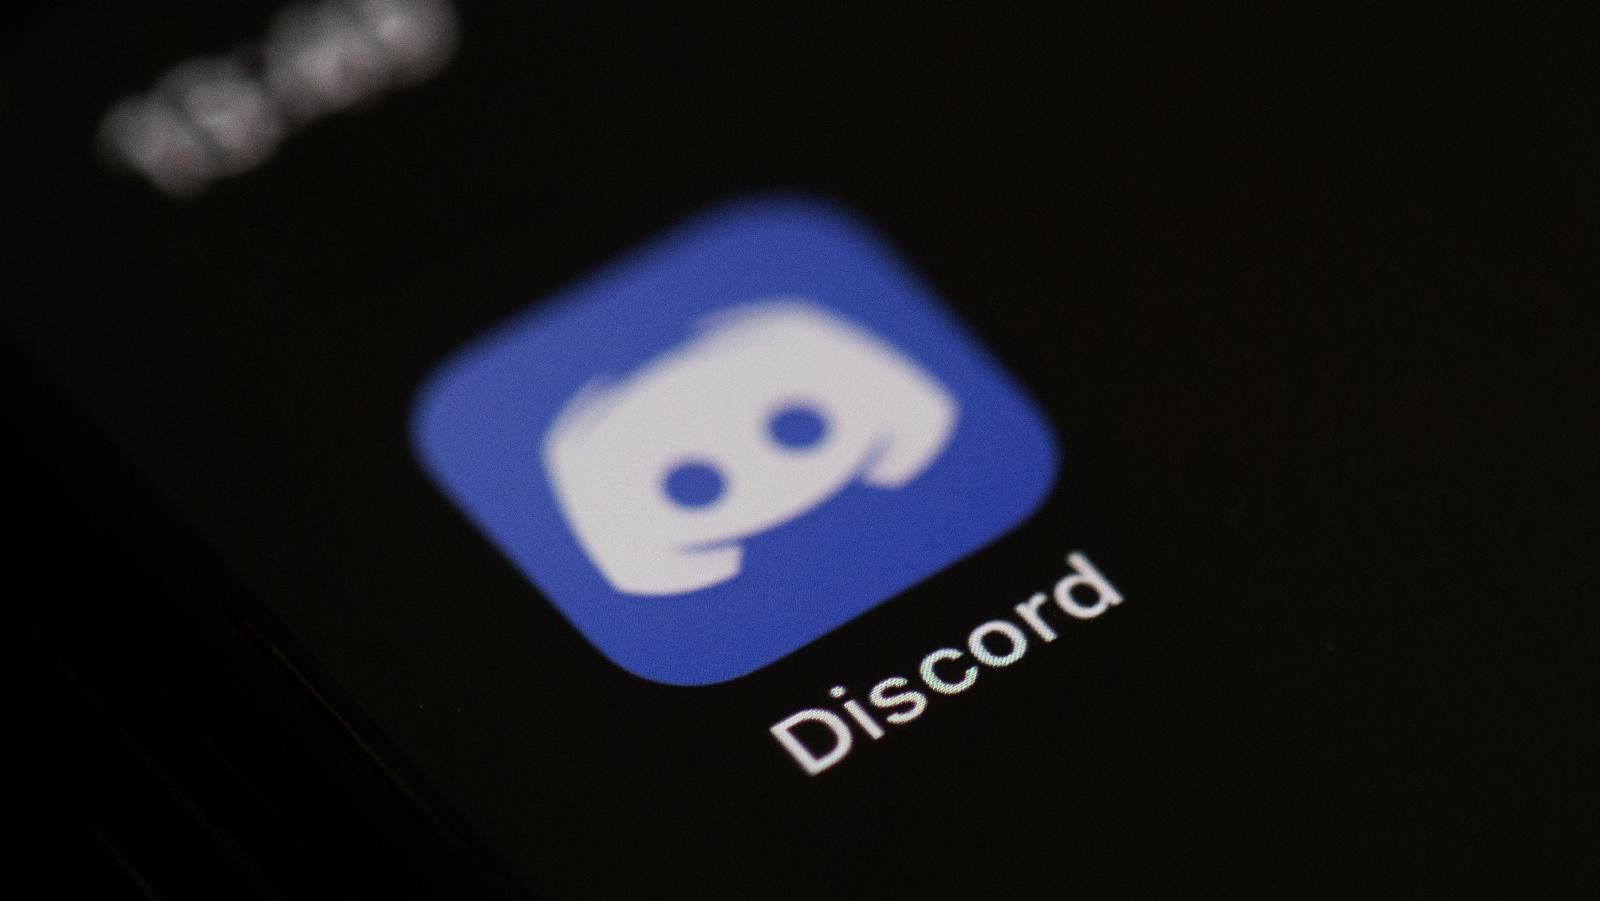 Discord comes back online after widespread outage